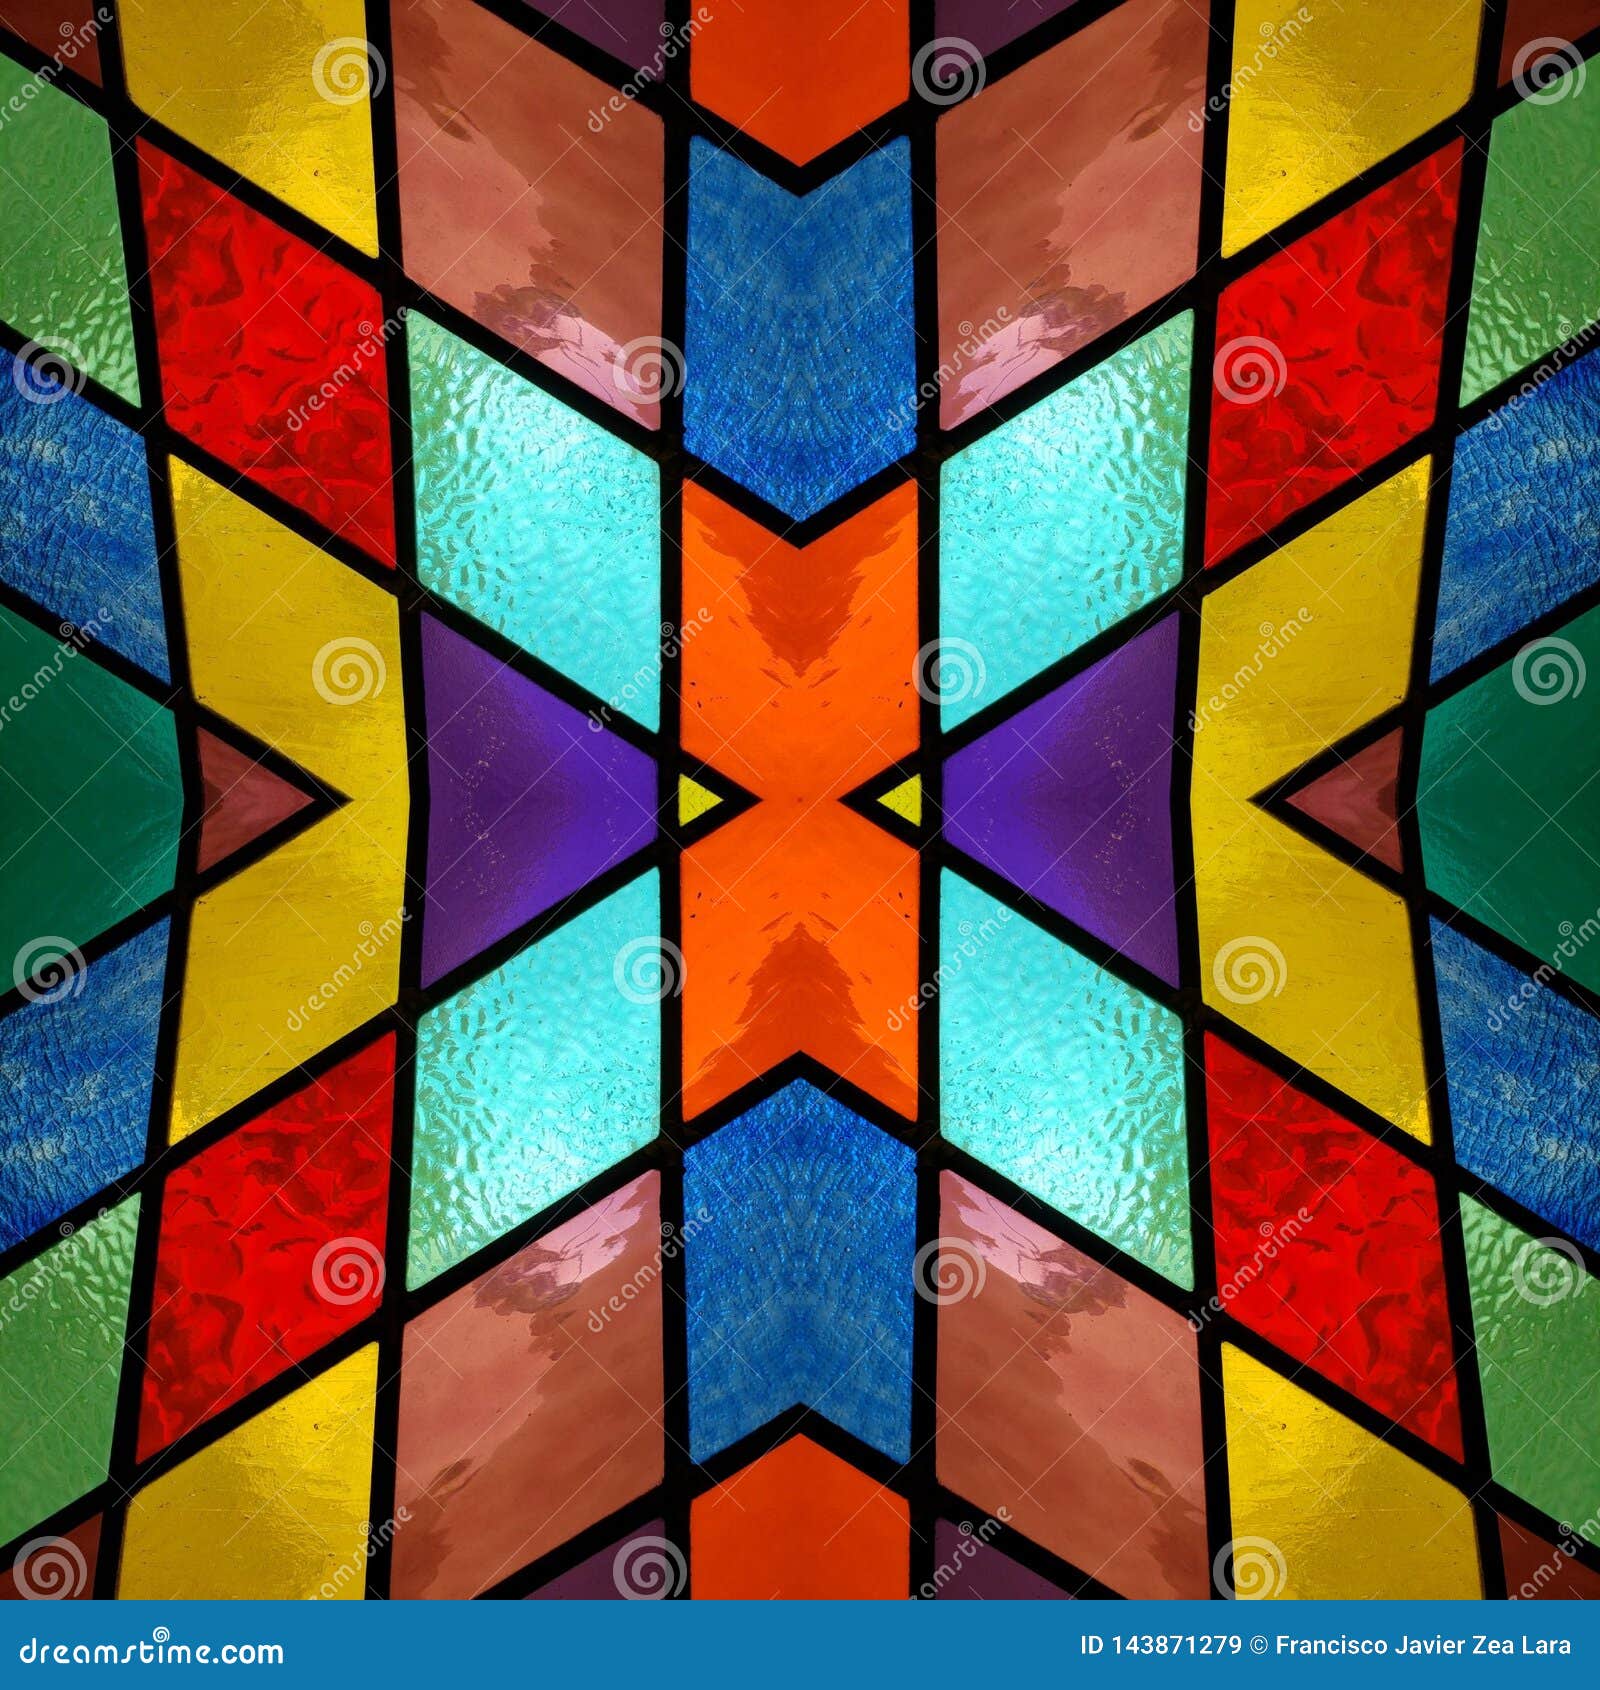 stained glass design templates modern